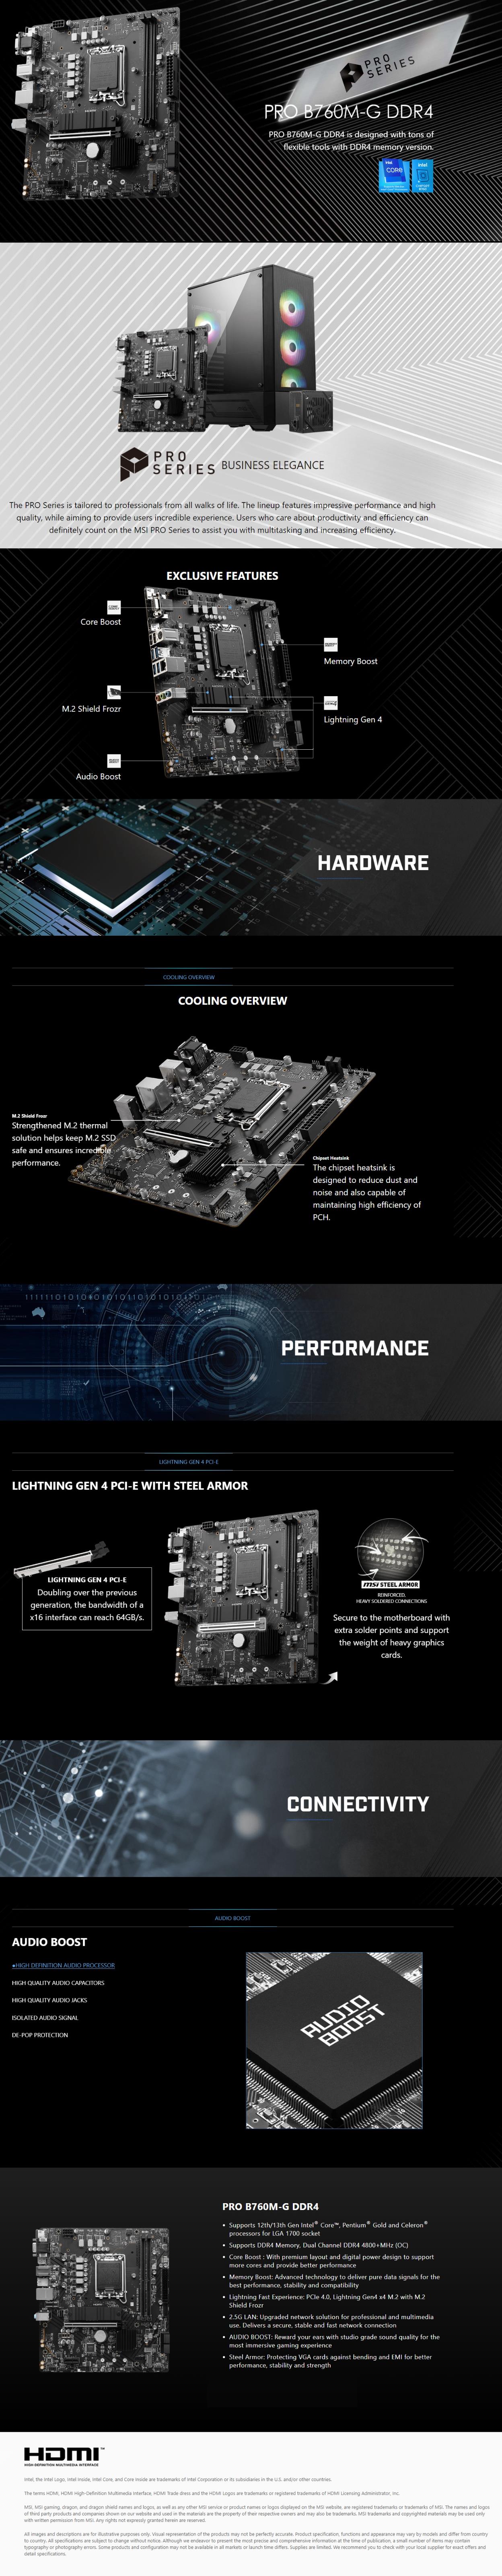 A large marketing image providing additional information about the product MSI PRO B760M-G DDR4 LGA1700 mATX Desktop Motherboard - Additional alt info not provided